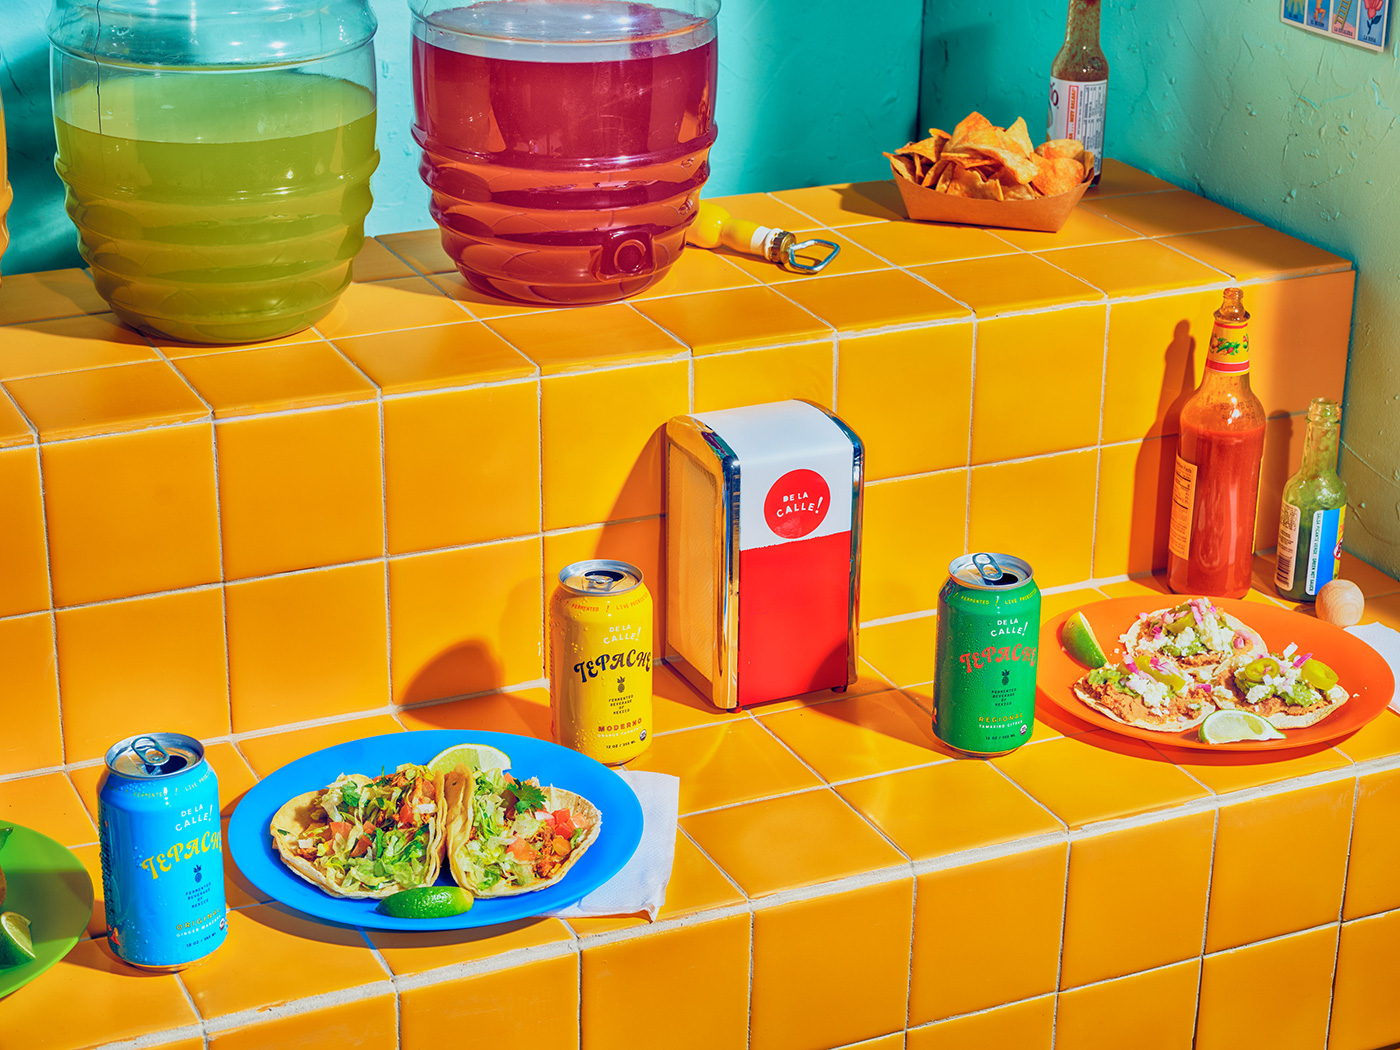 Colorful spread of tacos and beverages